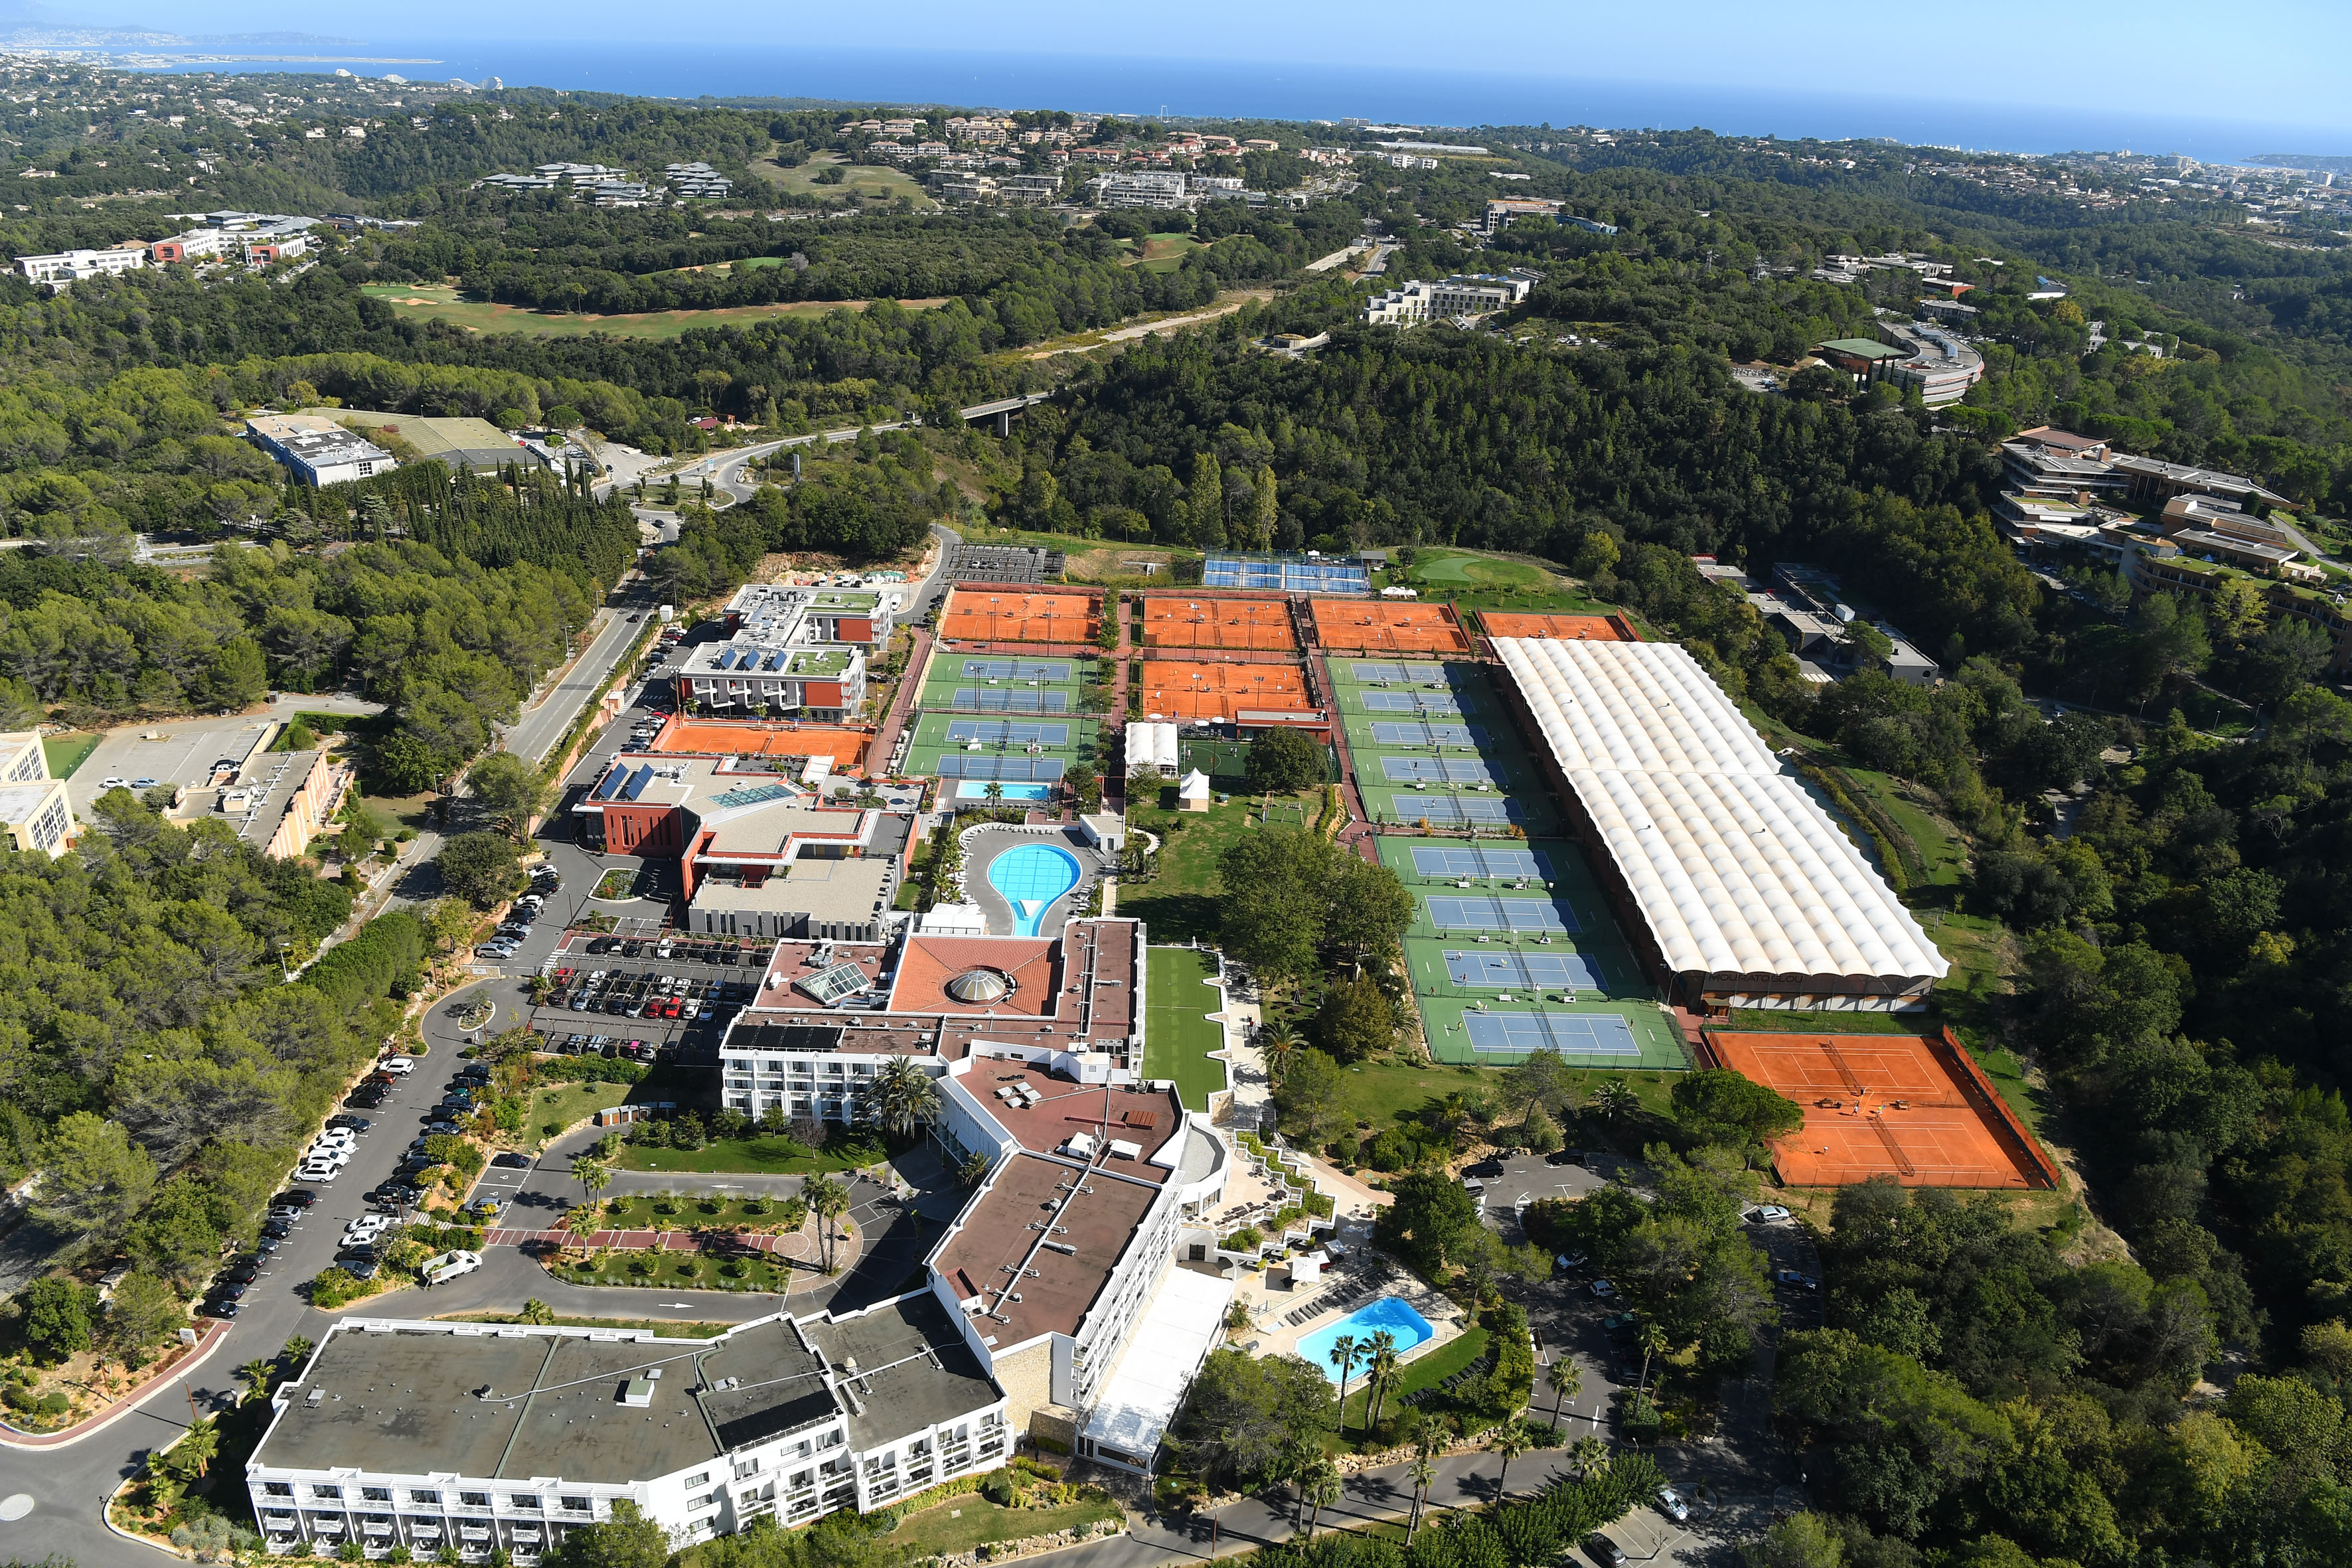 The Mouratoglou Academy is a base for many top players